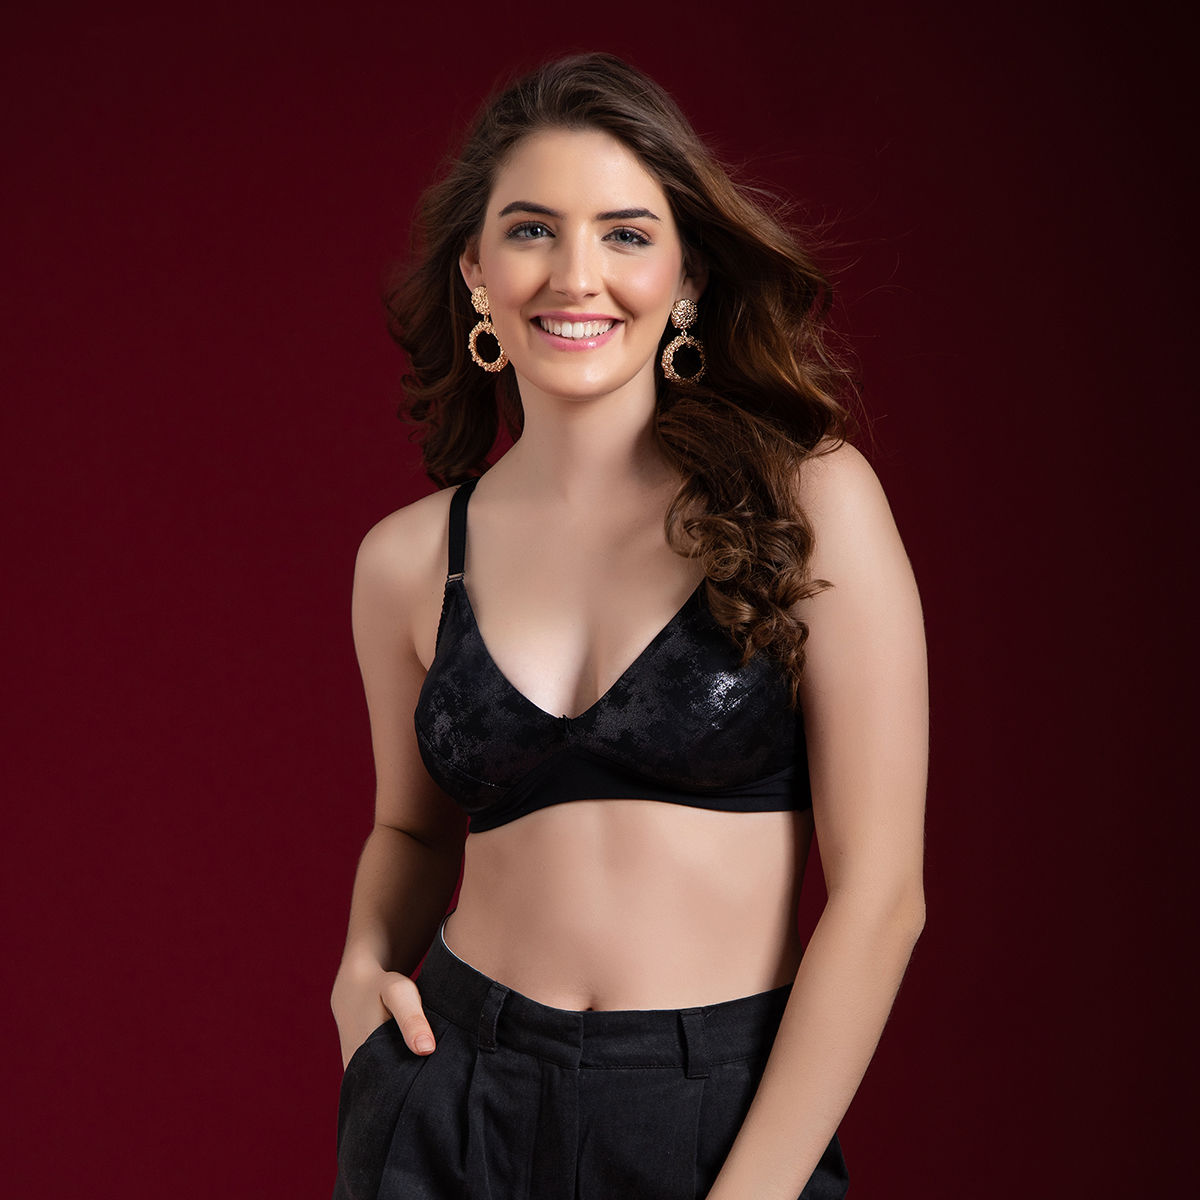 Buy Padded Non-Wired Demi-Cup Feeding Bra in Black - Cotton Online India,  Best Prices, COD - Clovia - BR2199P13